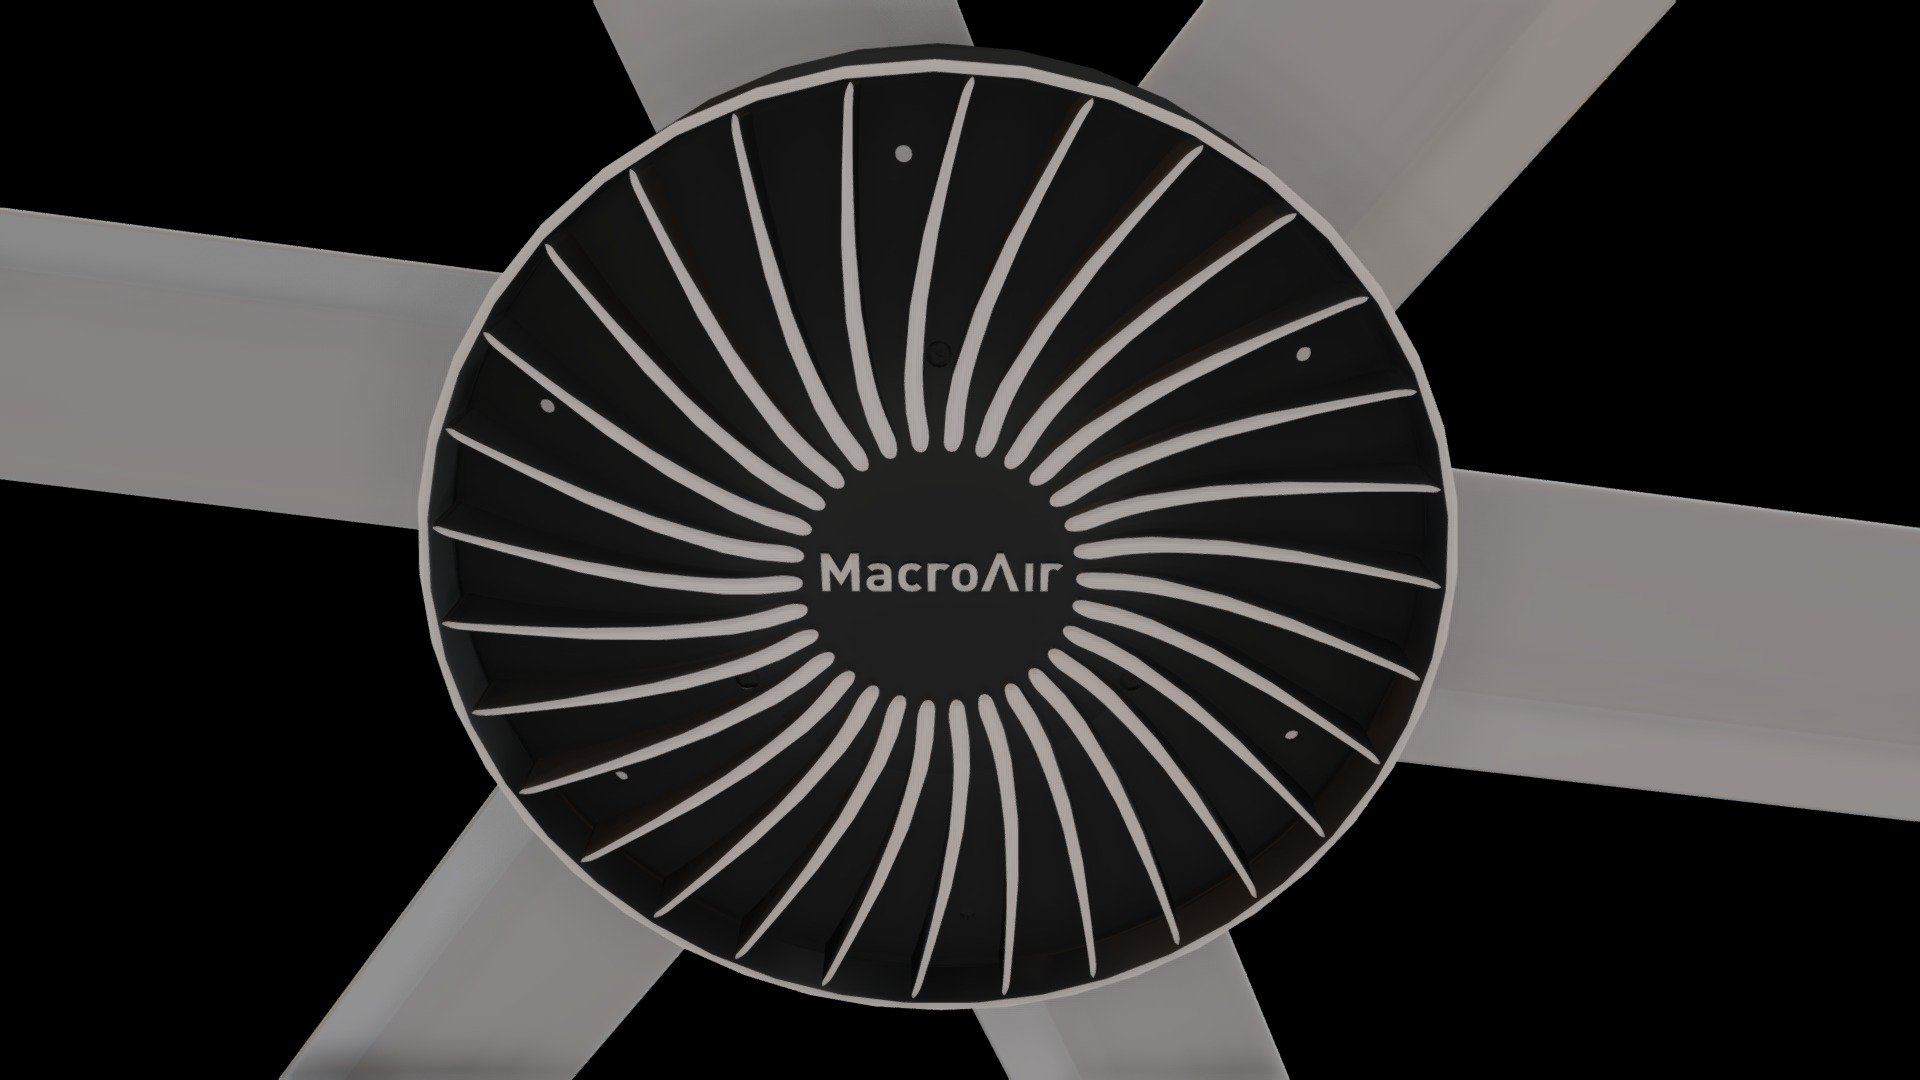 MacroAir

HVLS Fans - Big ceiling fans are durable, cost-effective and provide massive air movement in industrial and commercial spaces&hellip;

https://macroairfans.com/ - MacroAir HVLS - 3D model by castle3D 3d model